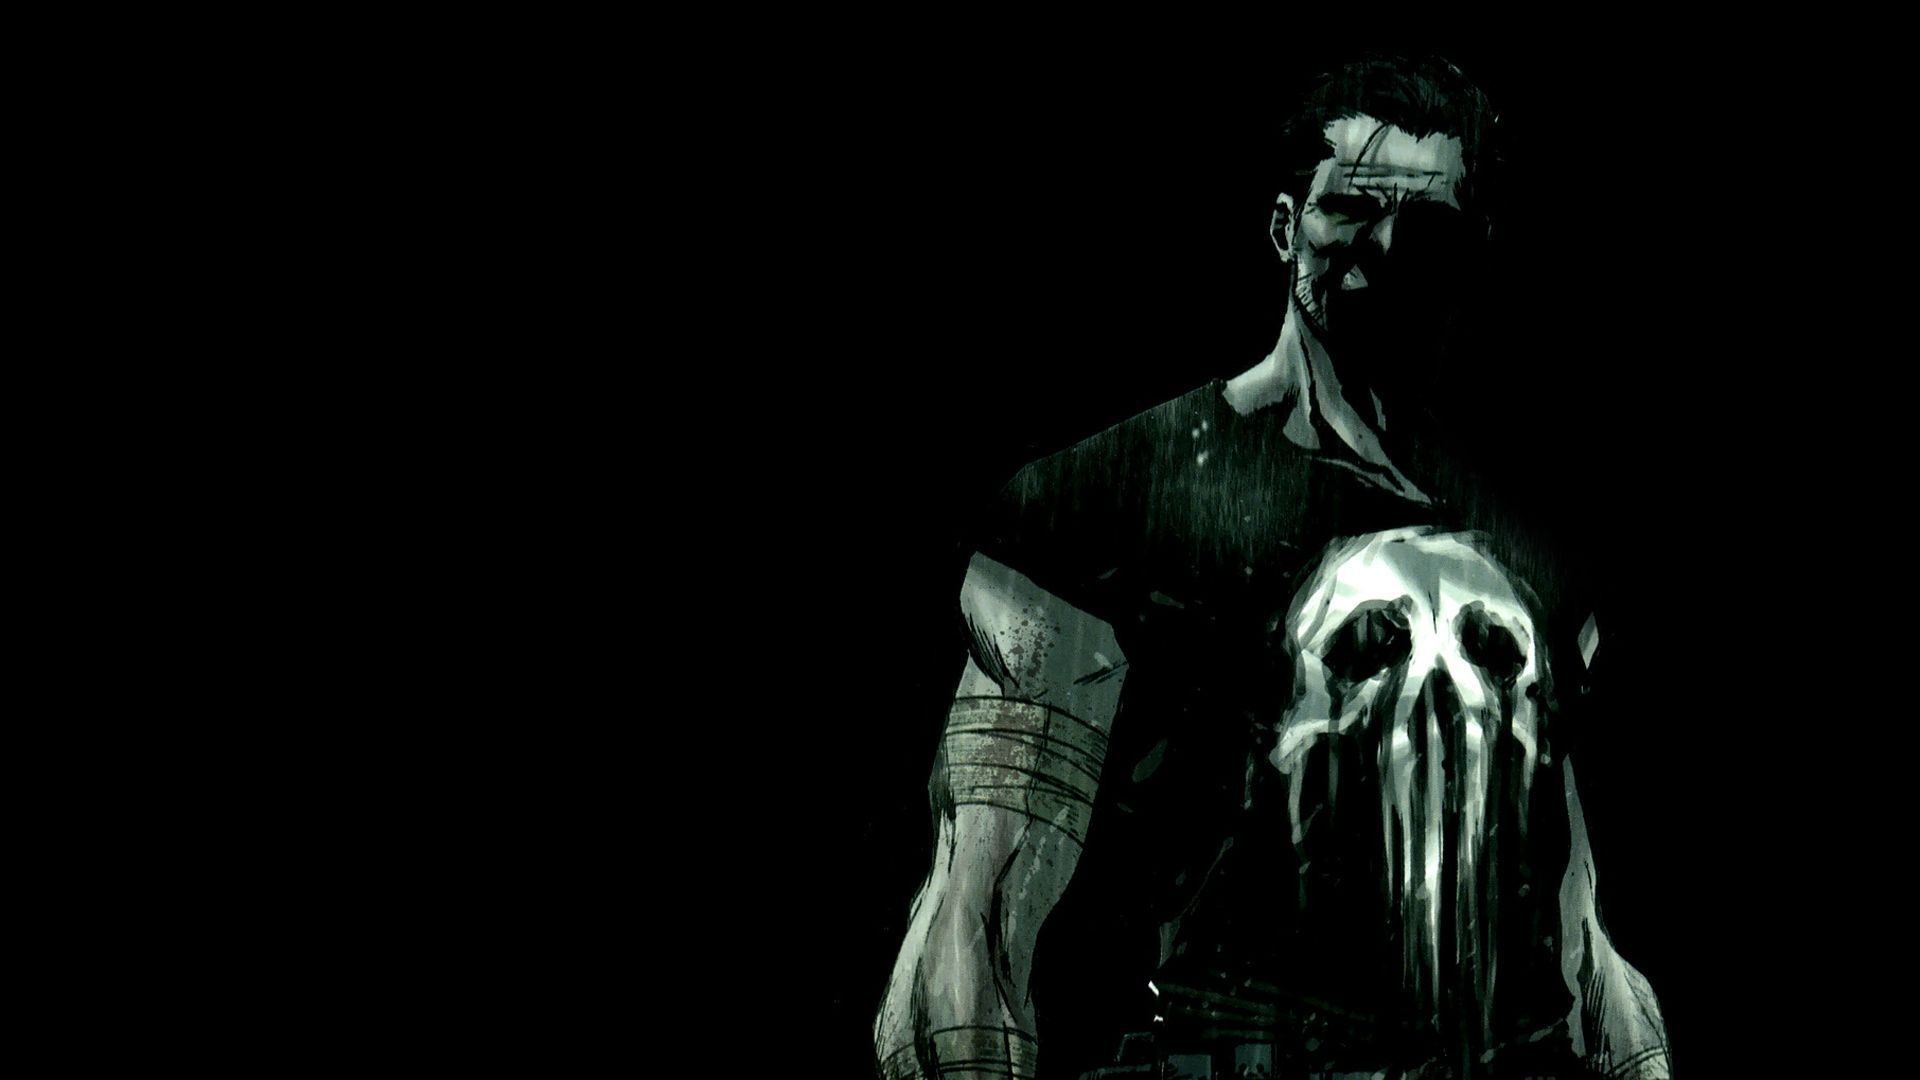 1920x1080 The Punisher Wallpapers Desktop K HD Backgrounds Fungyung | HD Wallpapers |  Pinterest | Punisher and Wallpaper